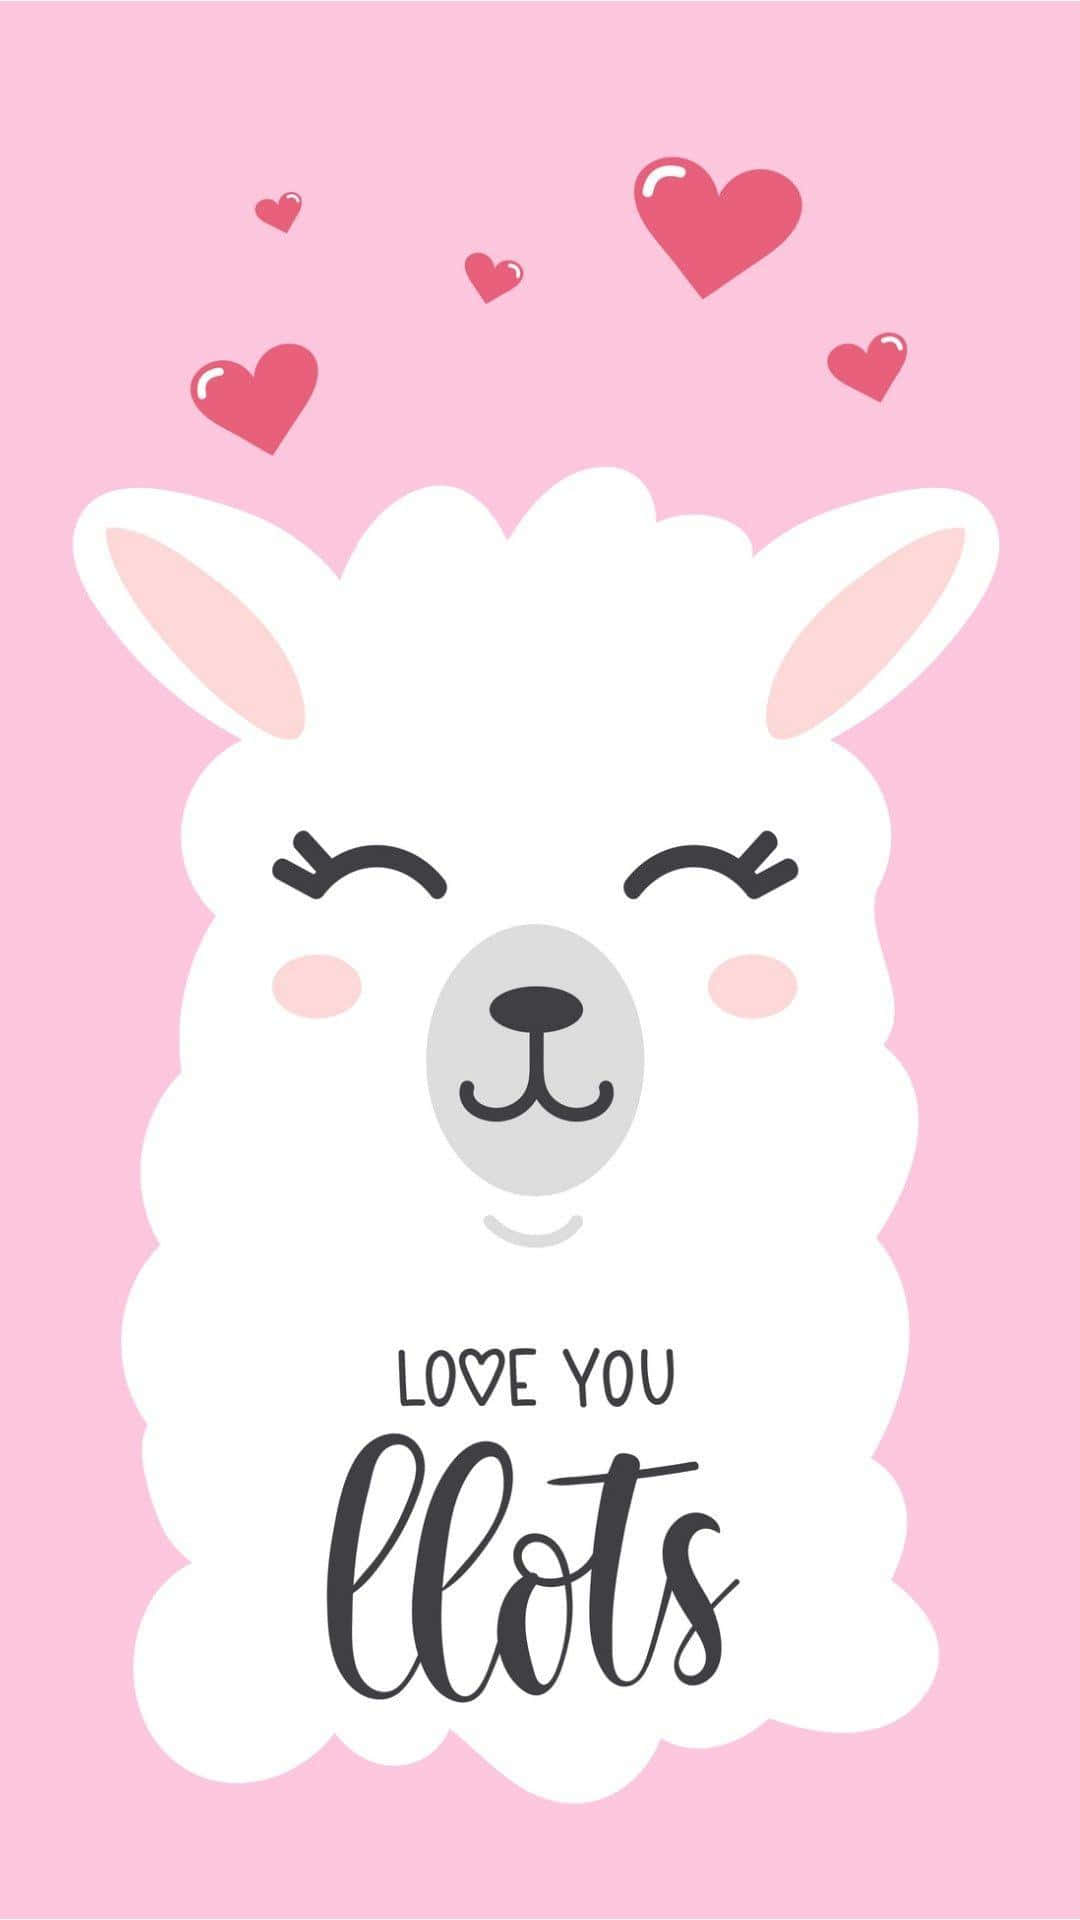 A Cute Llama With The Words Love You Lots On It Wallpaper